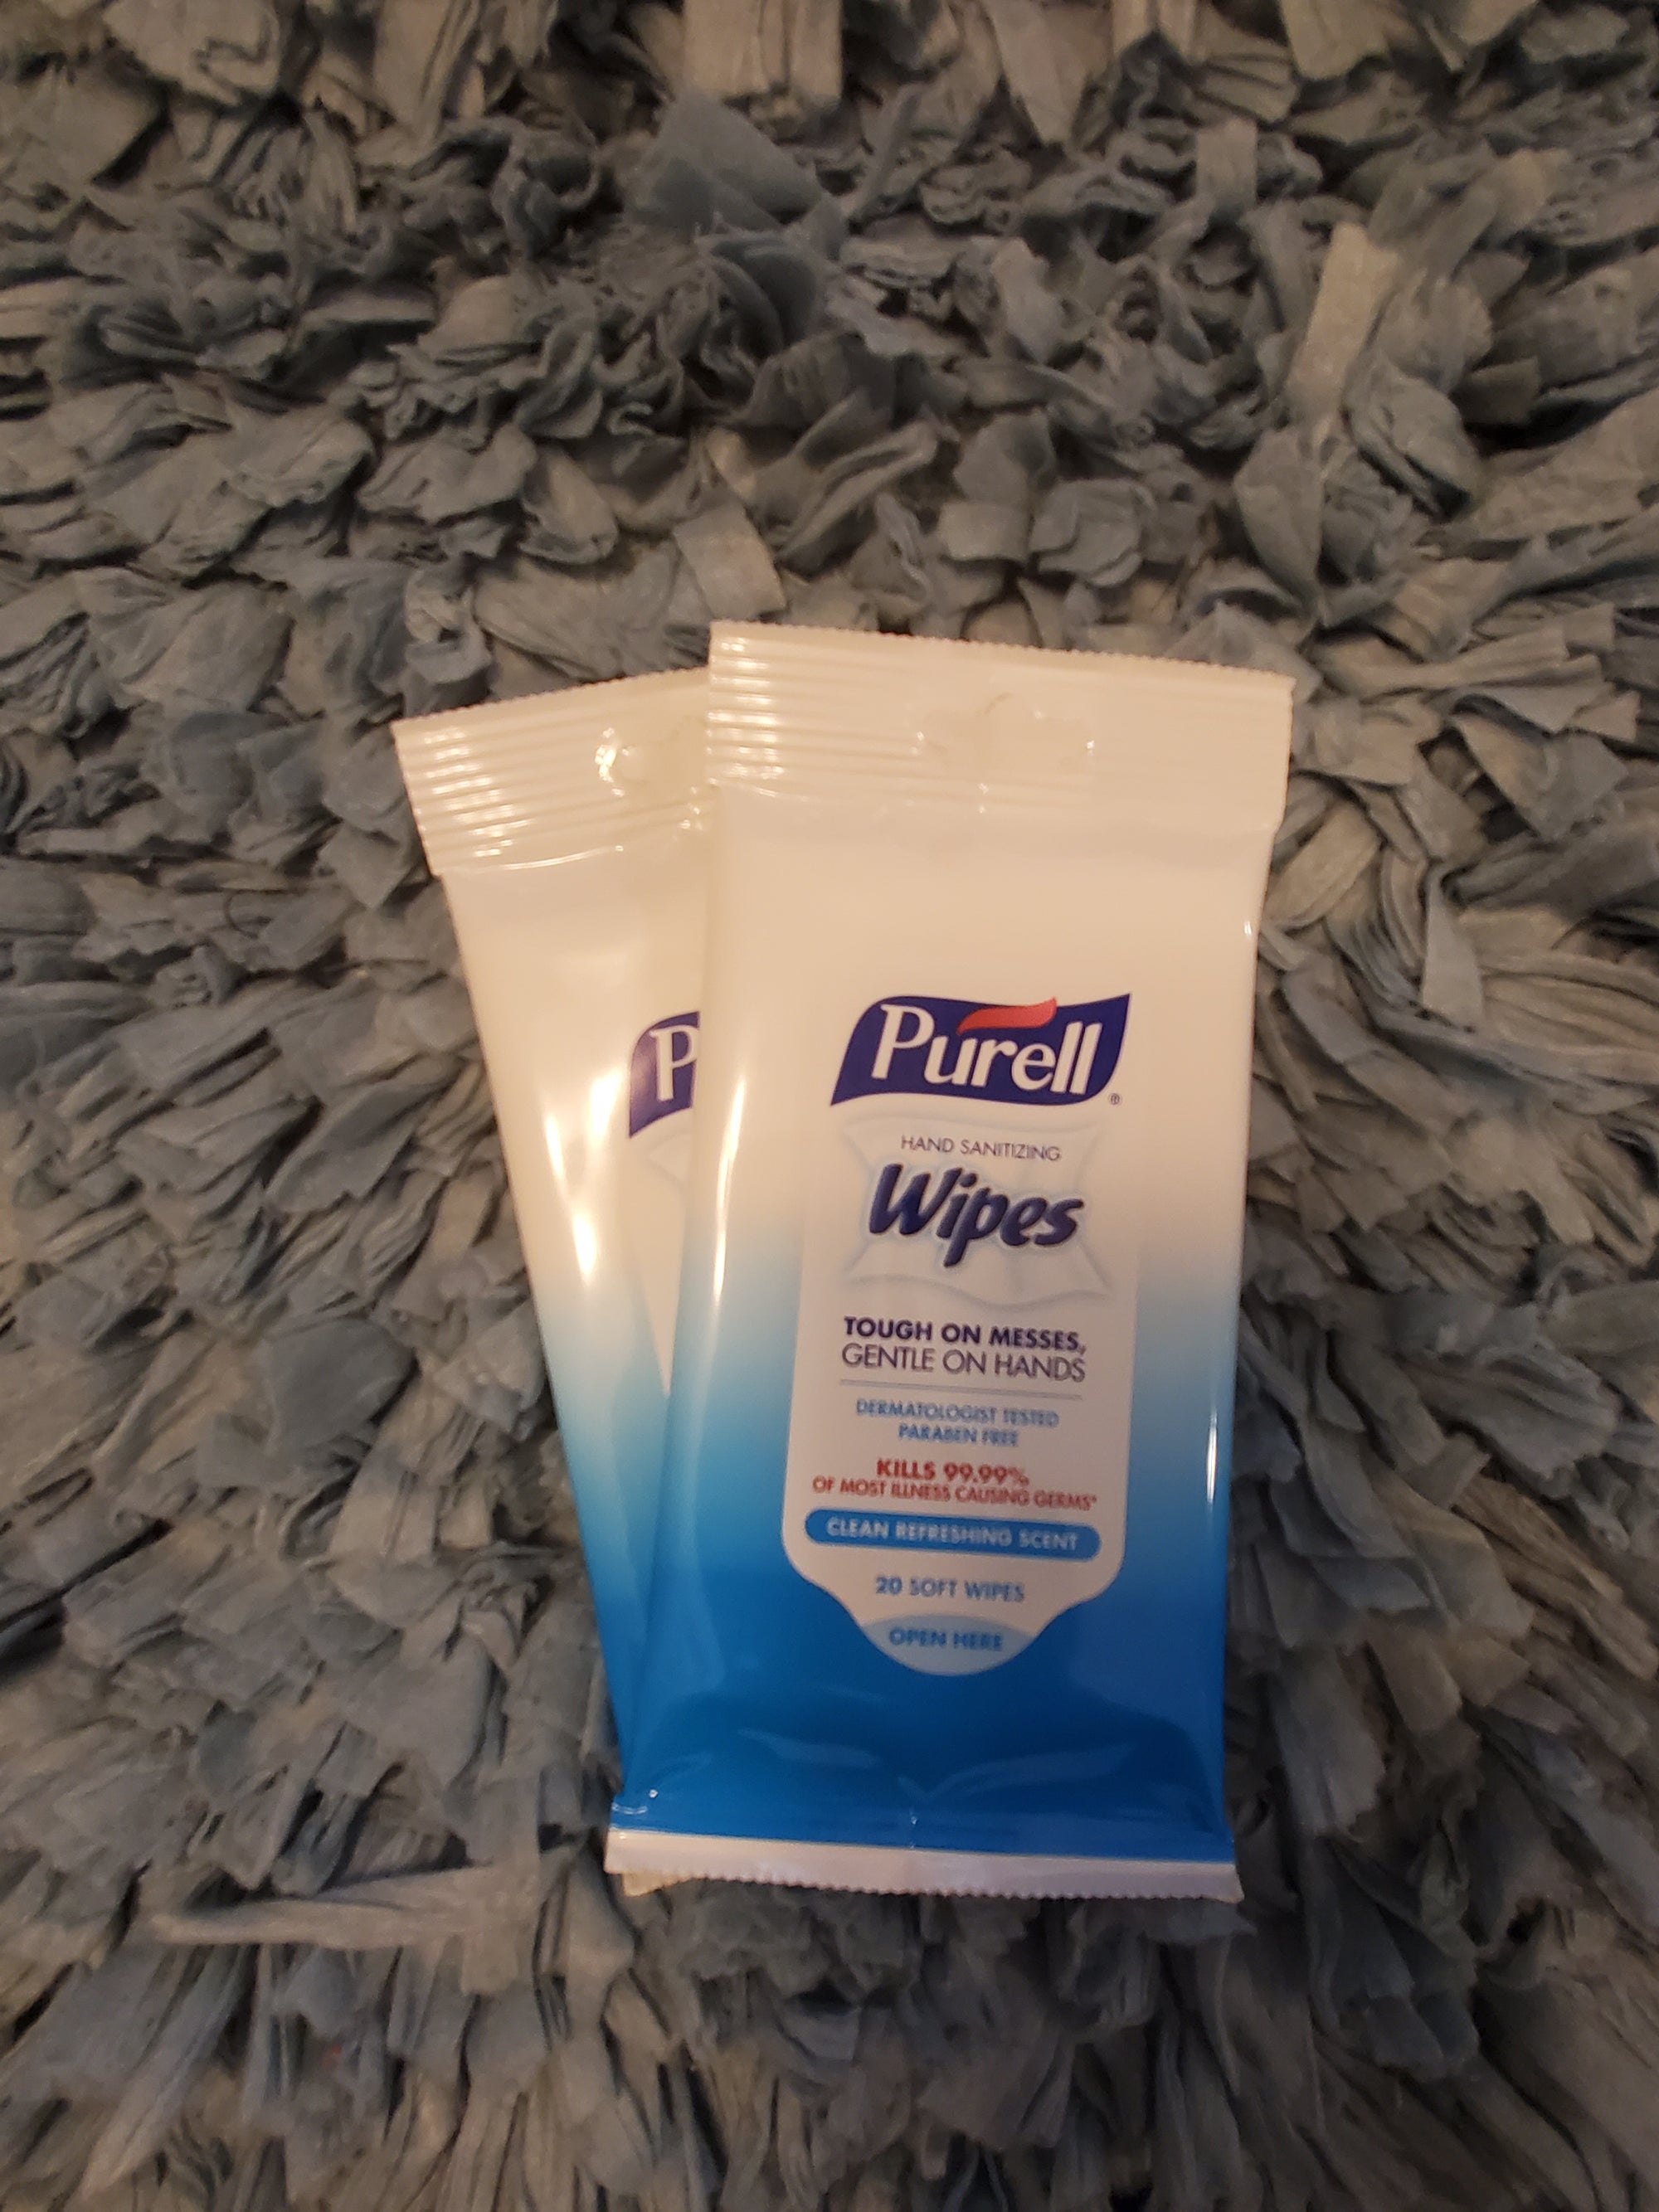 Purell Clean Refreshing Scent Hand Sanitizing Wipes (20 Soft Wipes/Package)